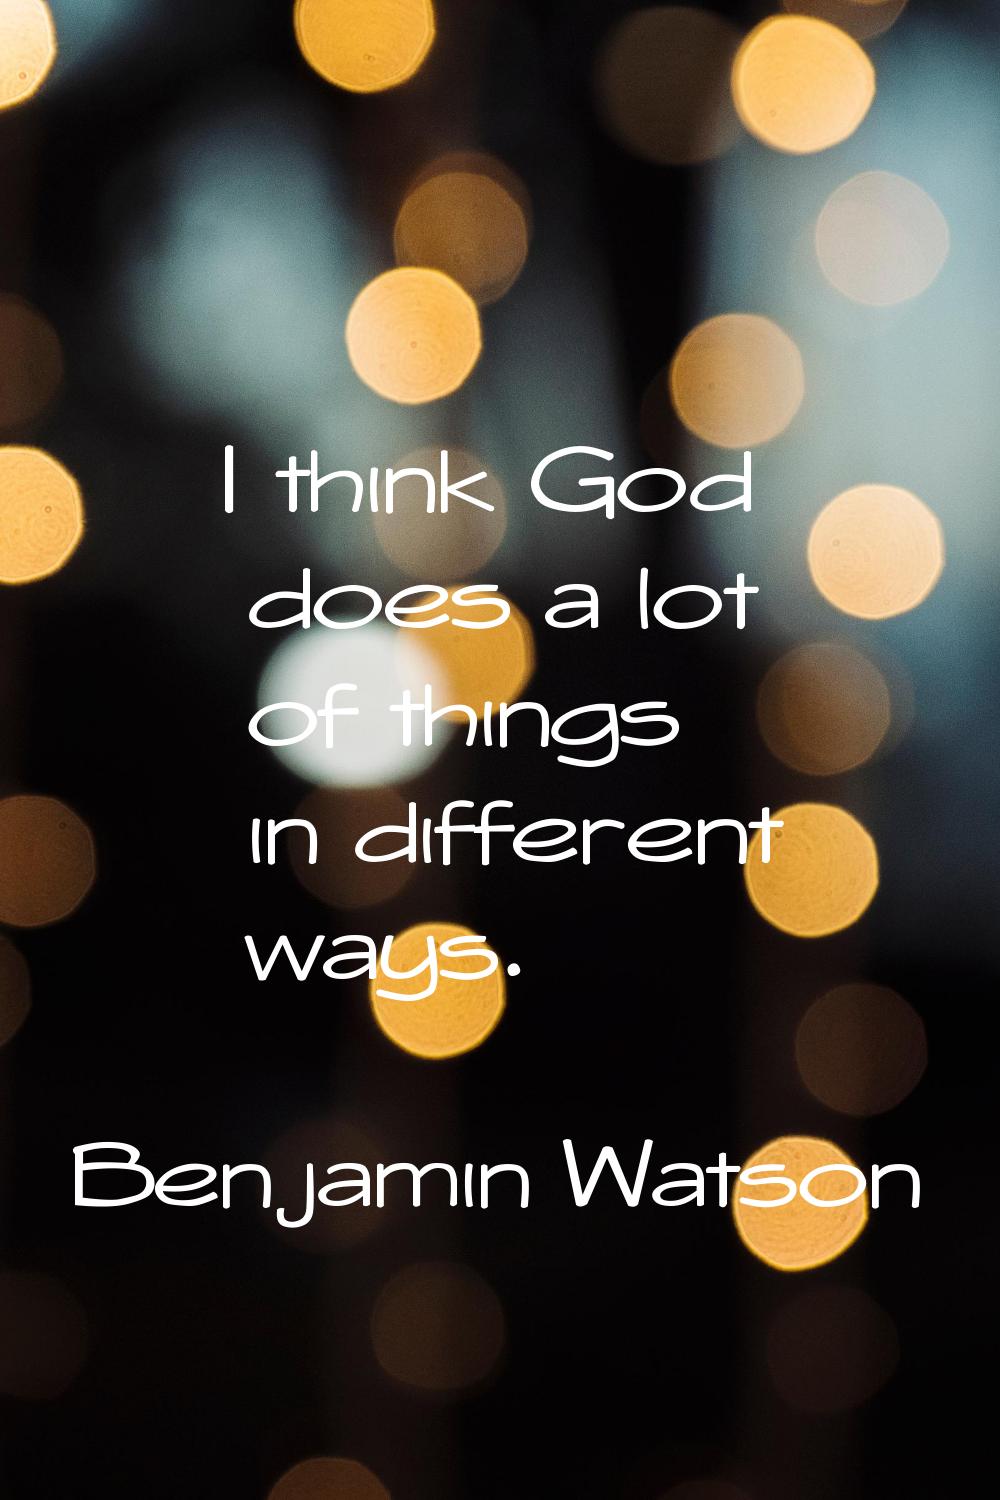 I think God does a lot of things in different ways.